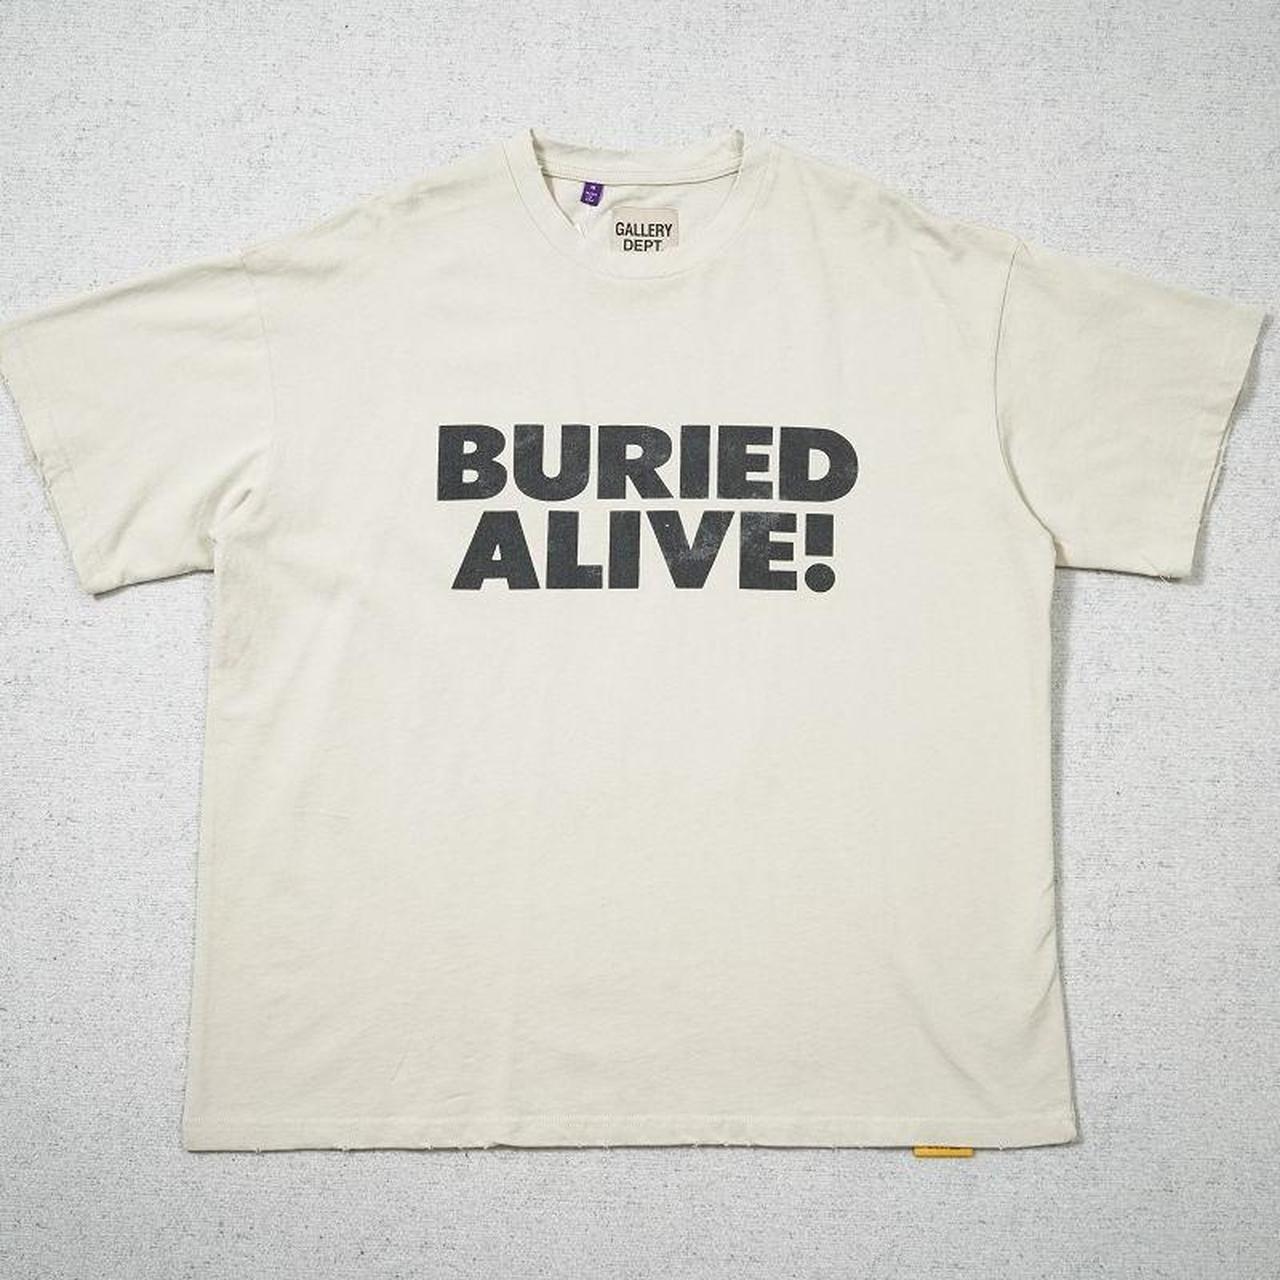 Gallery Dept Buried Alive Tee Size M Tried On Depop 